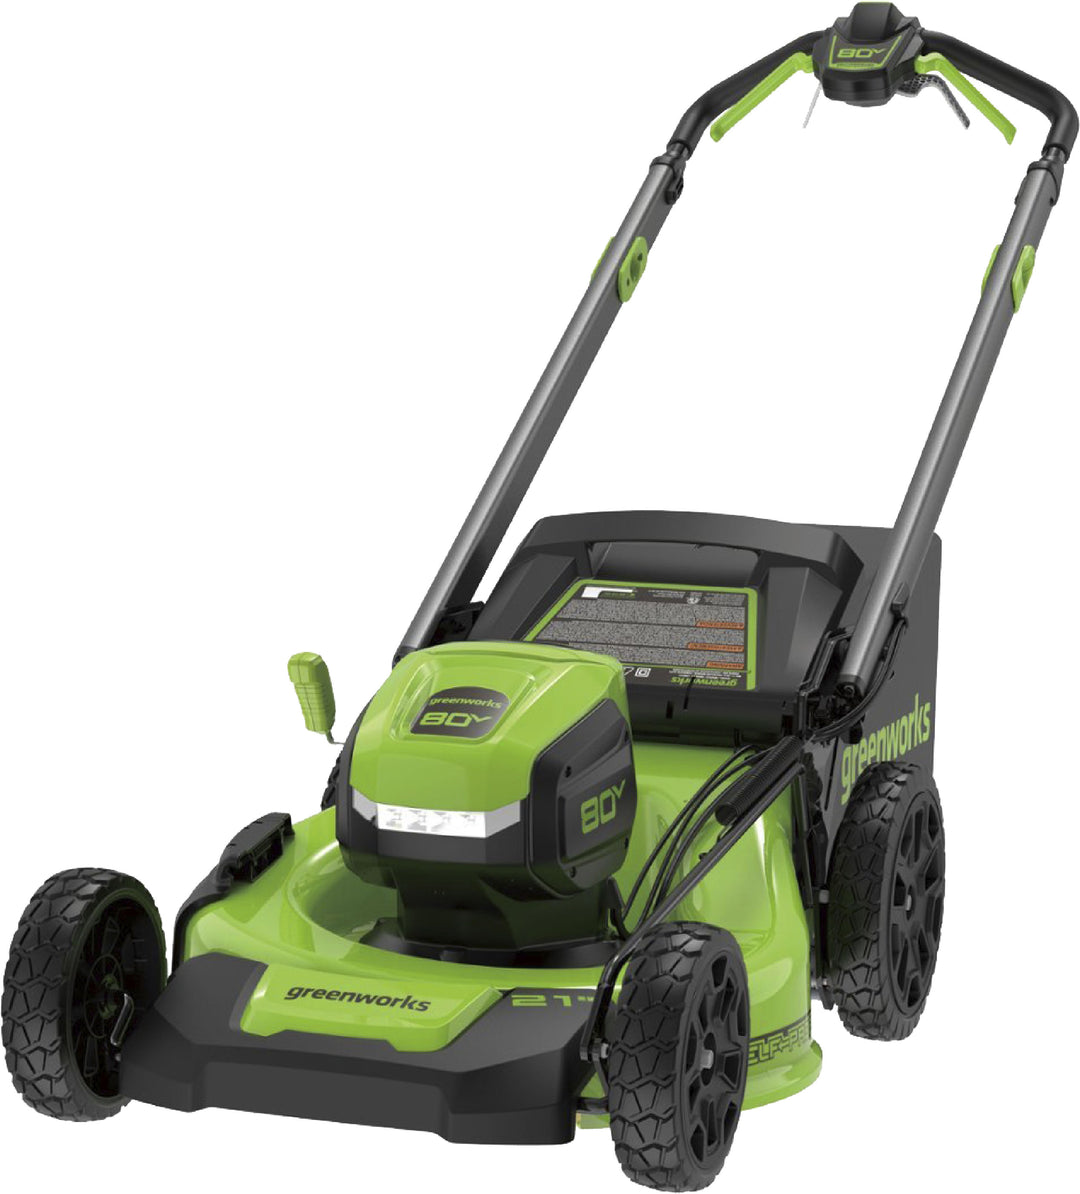 Greenworks - Refurbished 80V 21" Self-Propelled Lawn Mower (1 x 4.0 Ah Battery and 1 x Charger) - Green_9